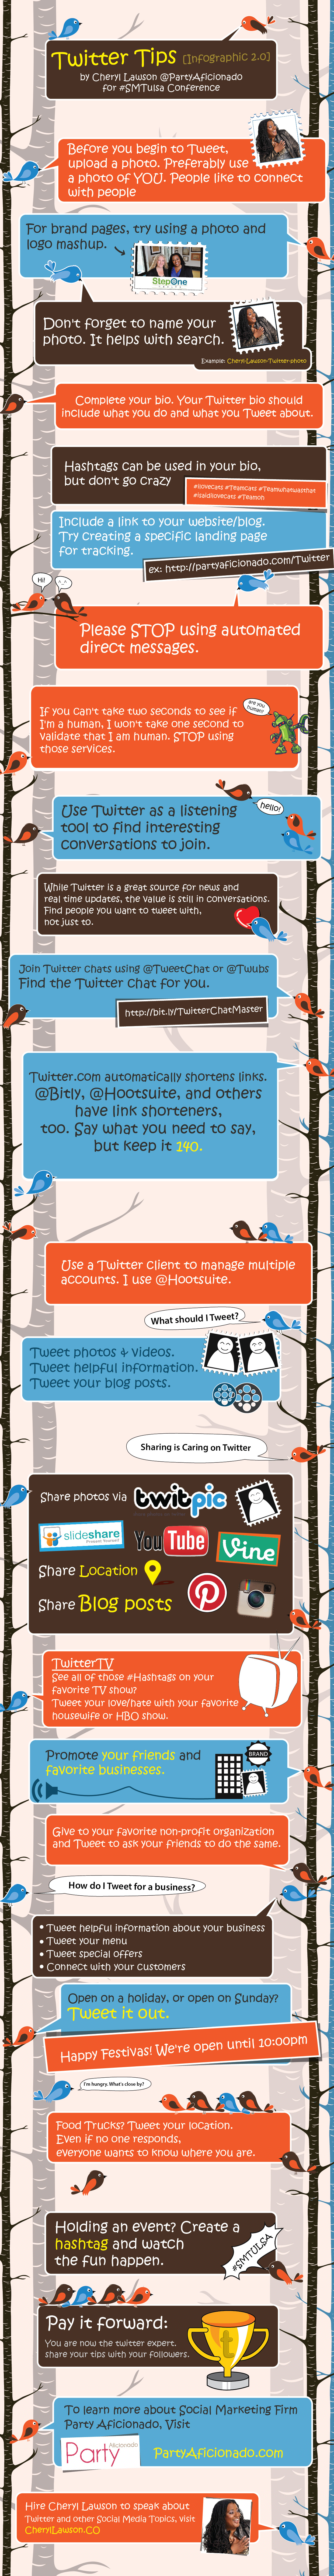 how-to-get-started-with-twitter